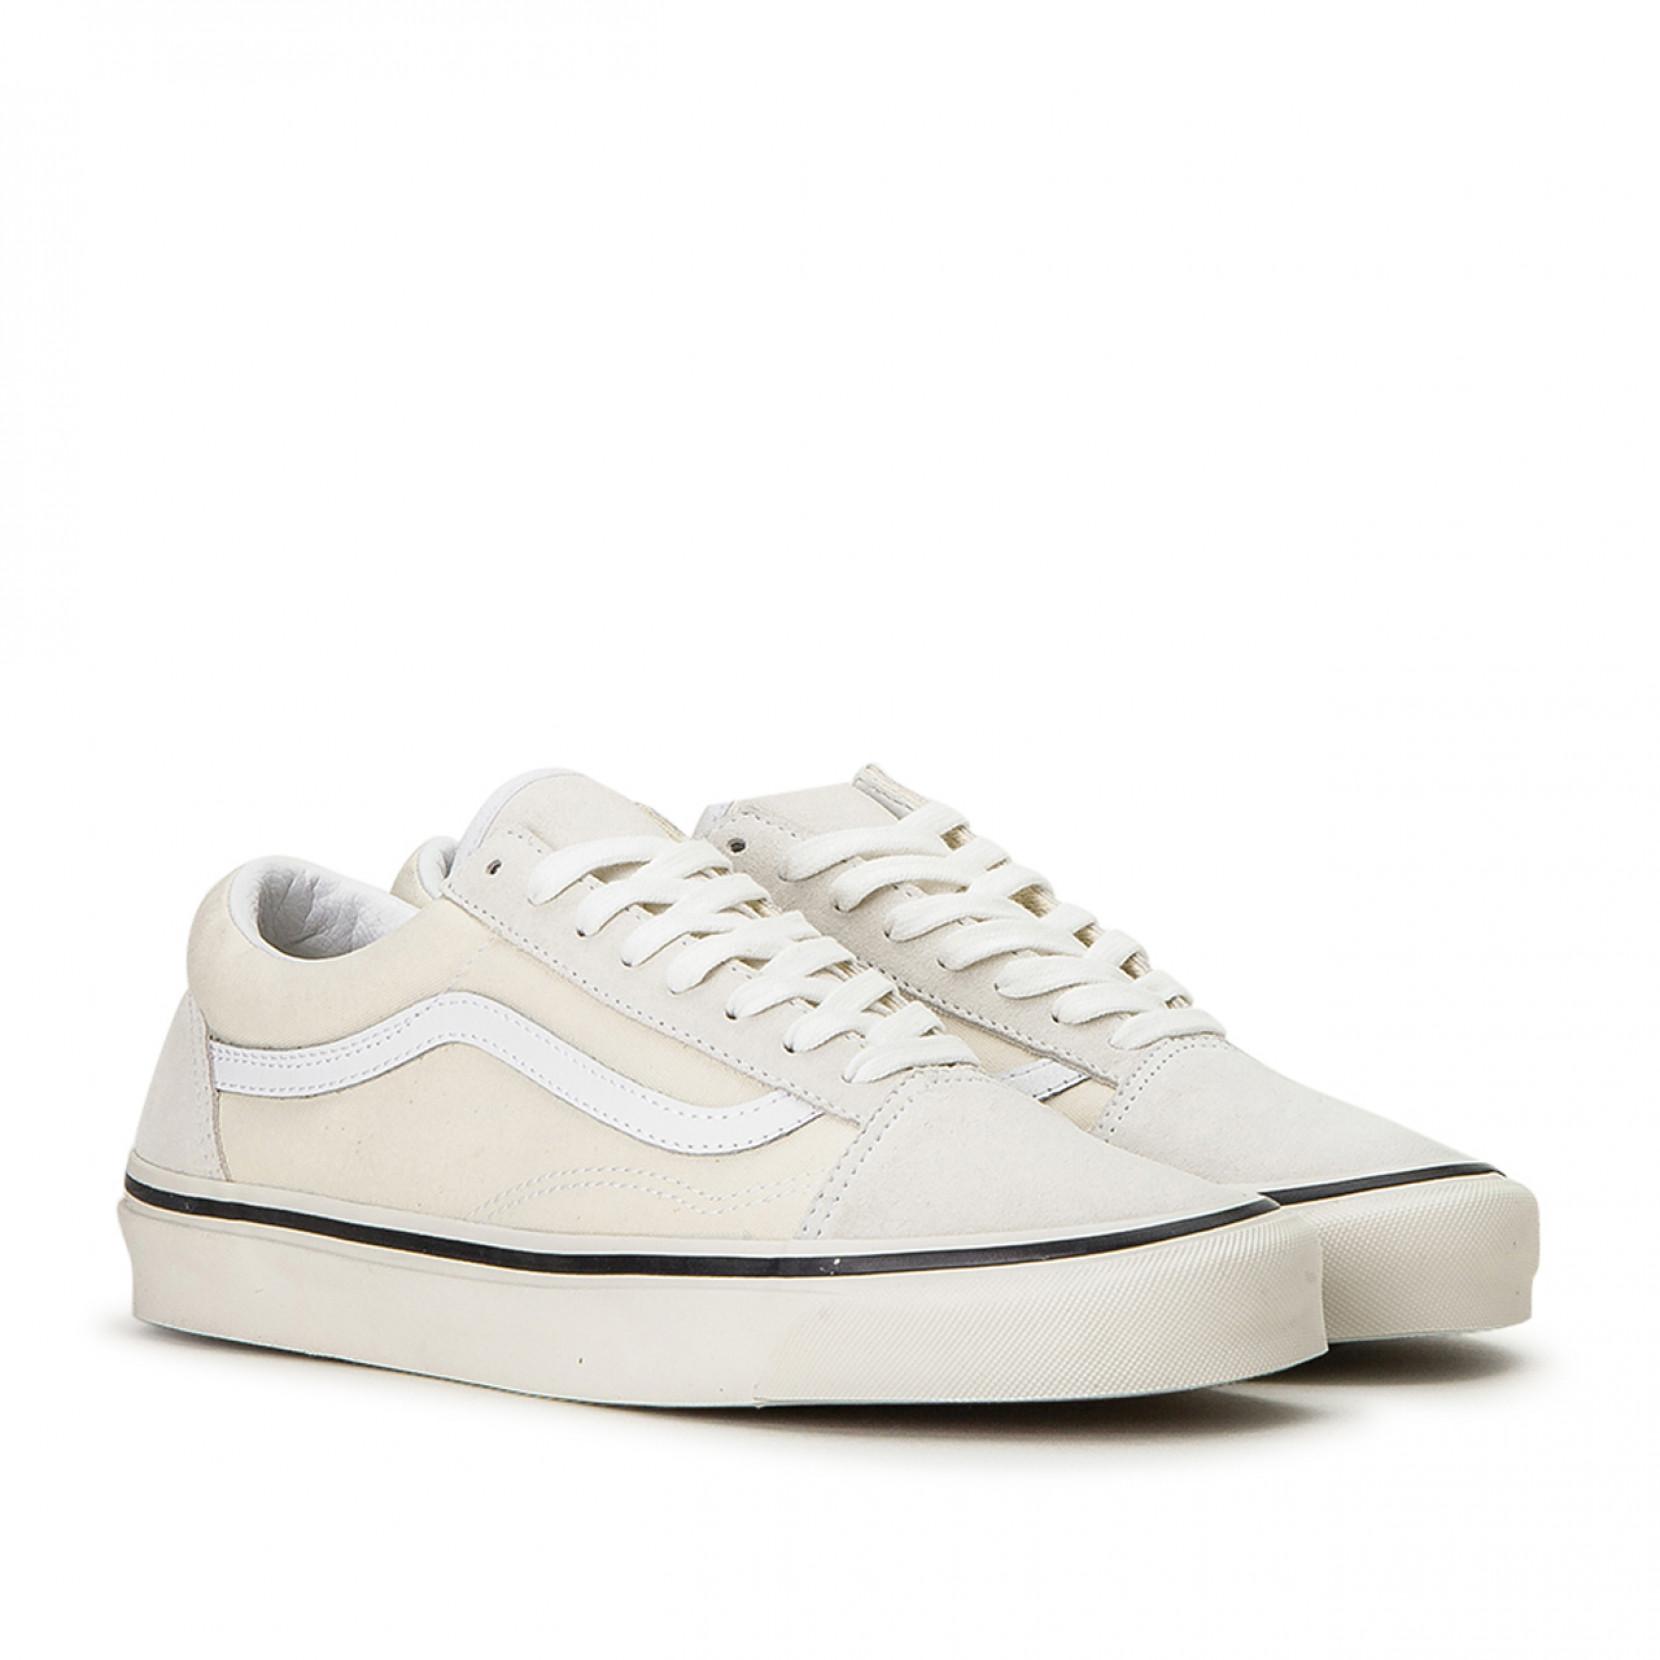 Vans Rubber Anaheim Old Skool 36 Dx Trainers in White - Save 30 